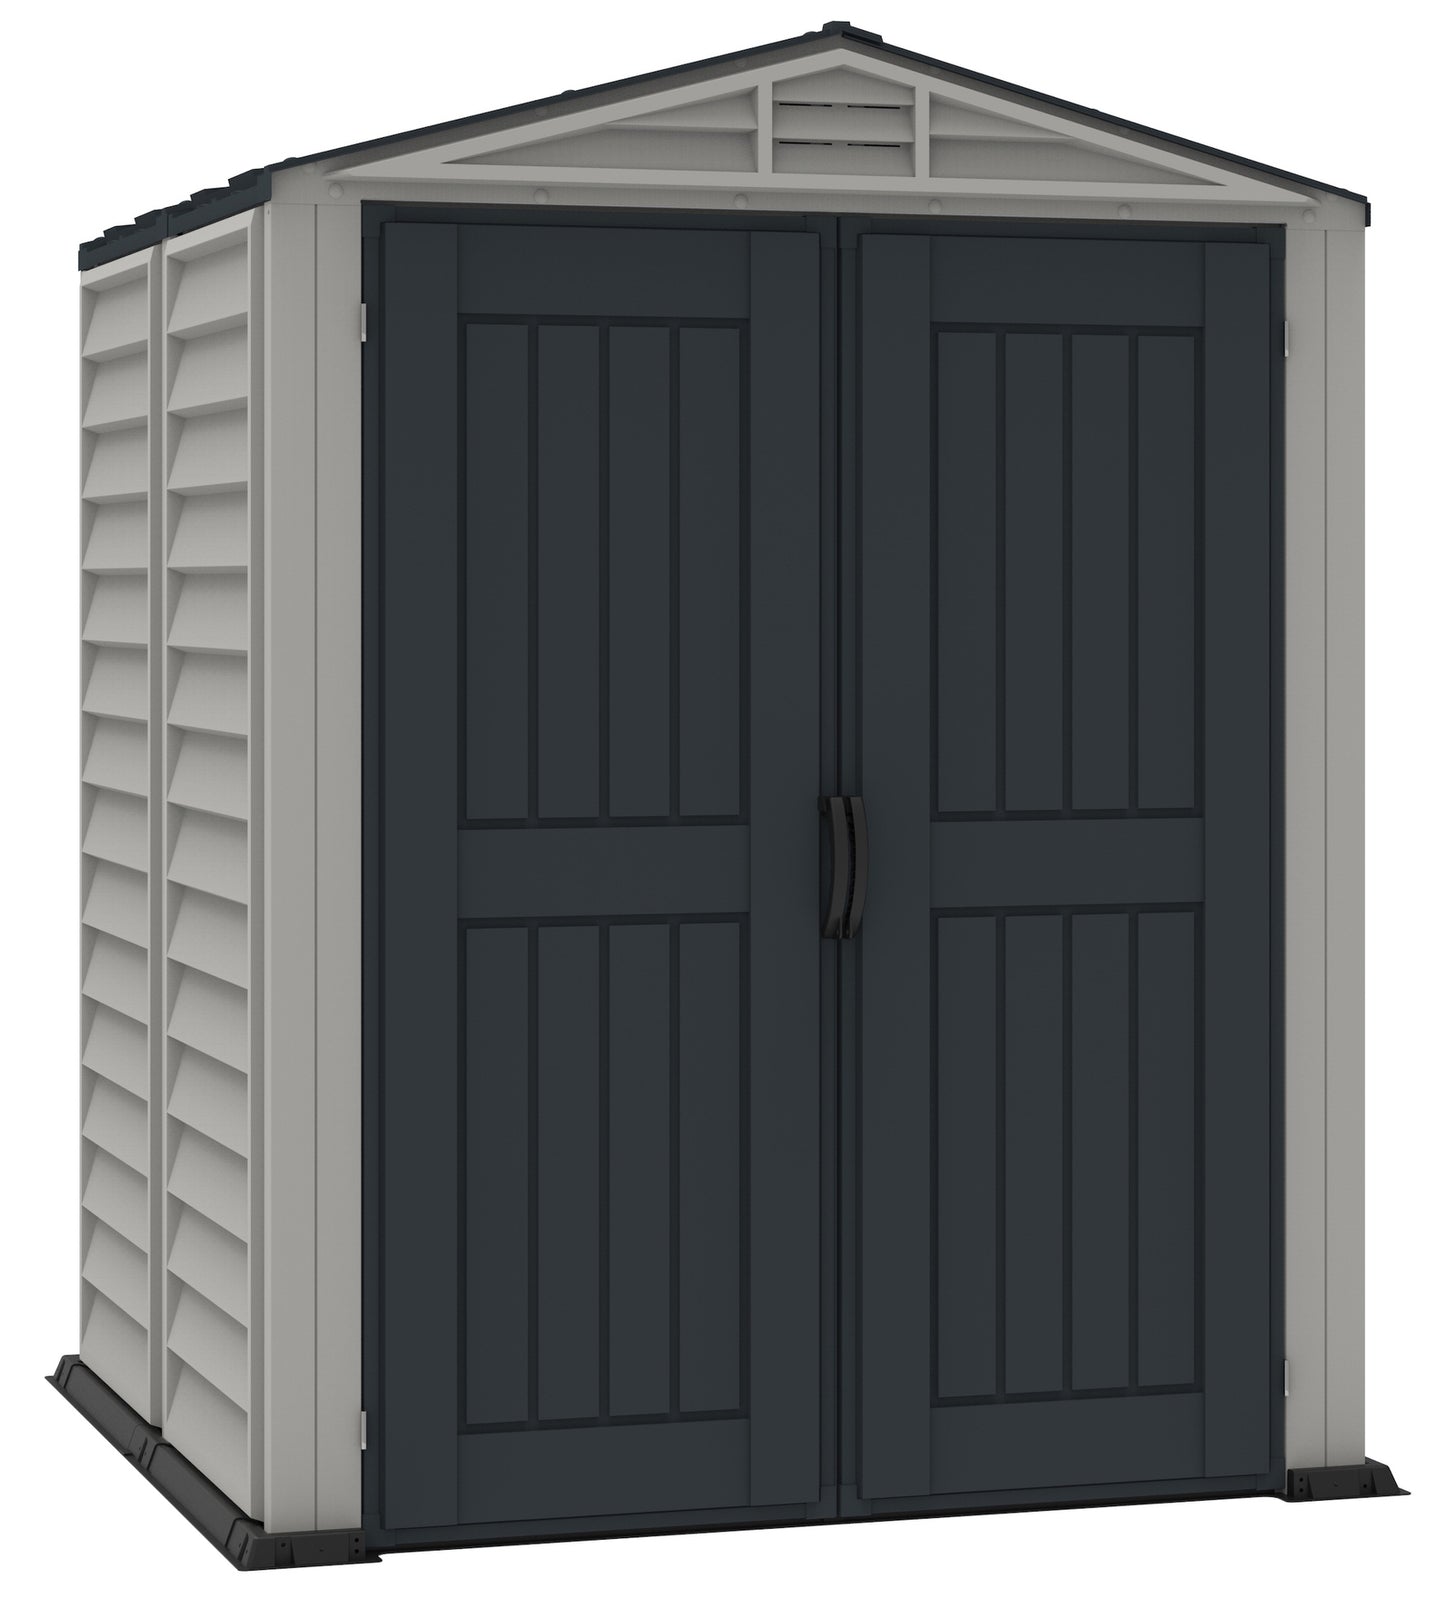 Duramax YardMate Plus 5 ft. 6 in. x 5ft. 6 in. Gray Vinyl Storage Shed with Molded Floor